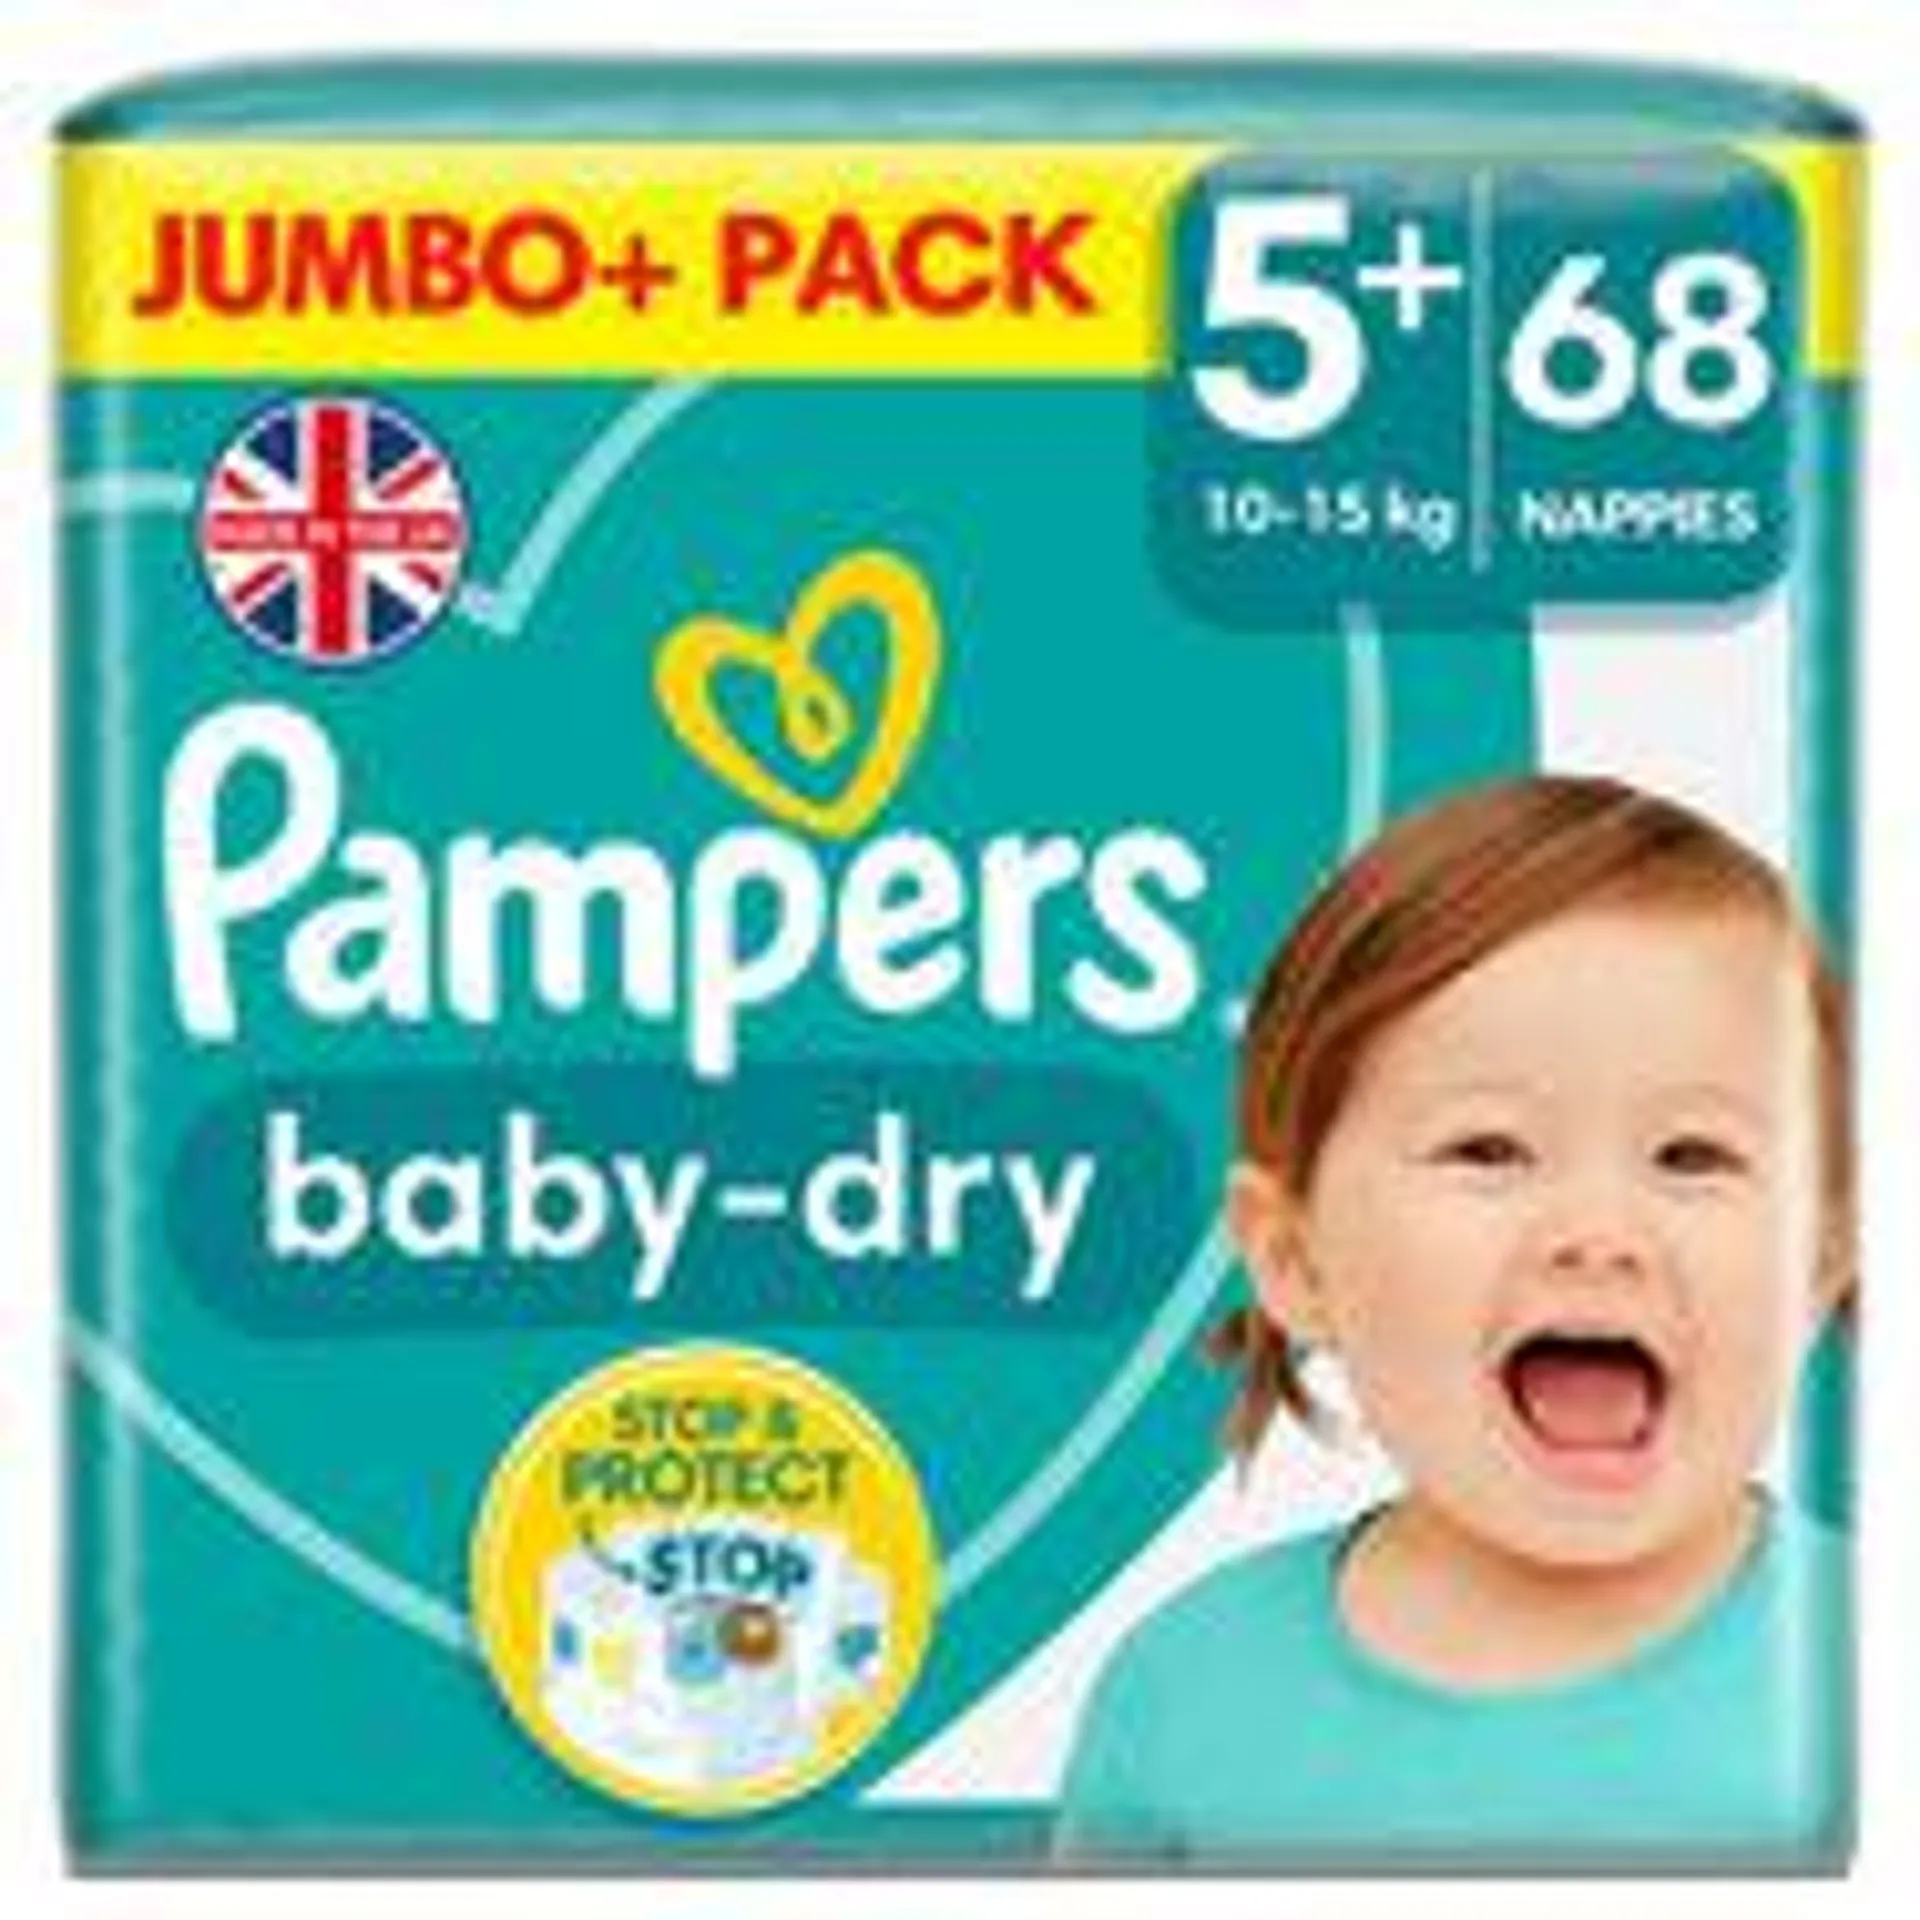 Pampers Baby-Dry Size 5+ Nappies Jumbo+ Pack